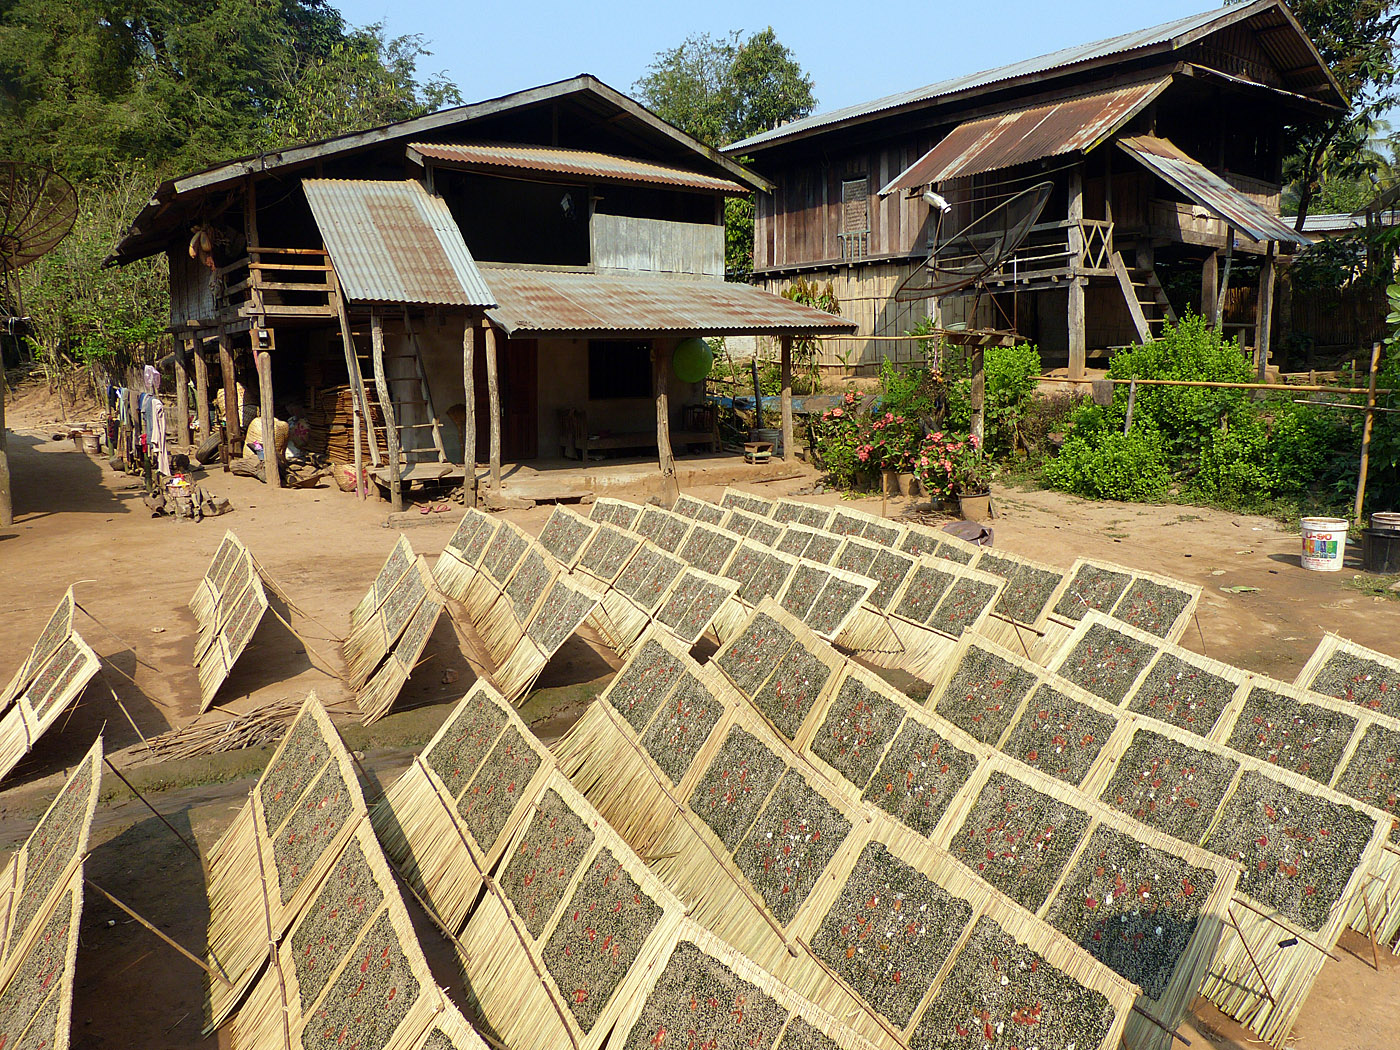 Riverweed drying, Mouangkham, Laos